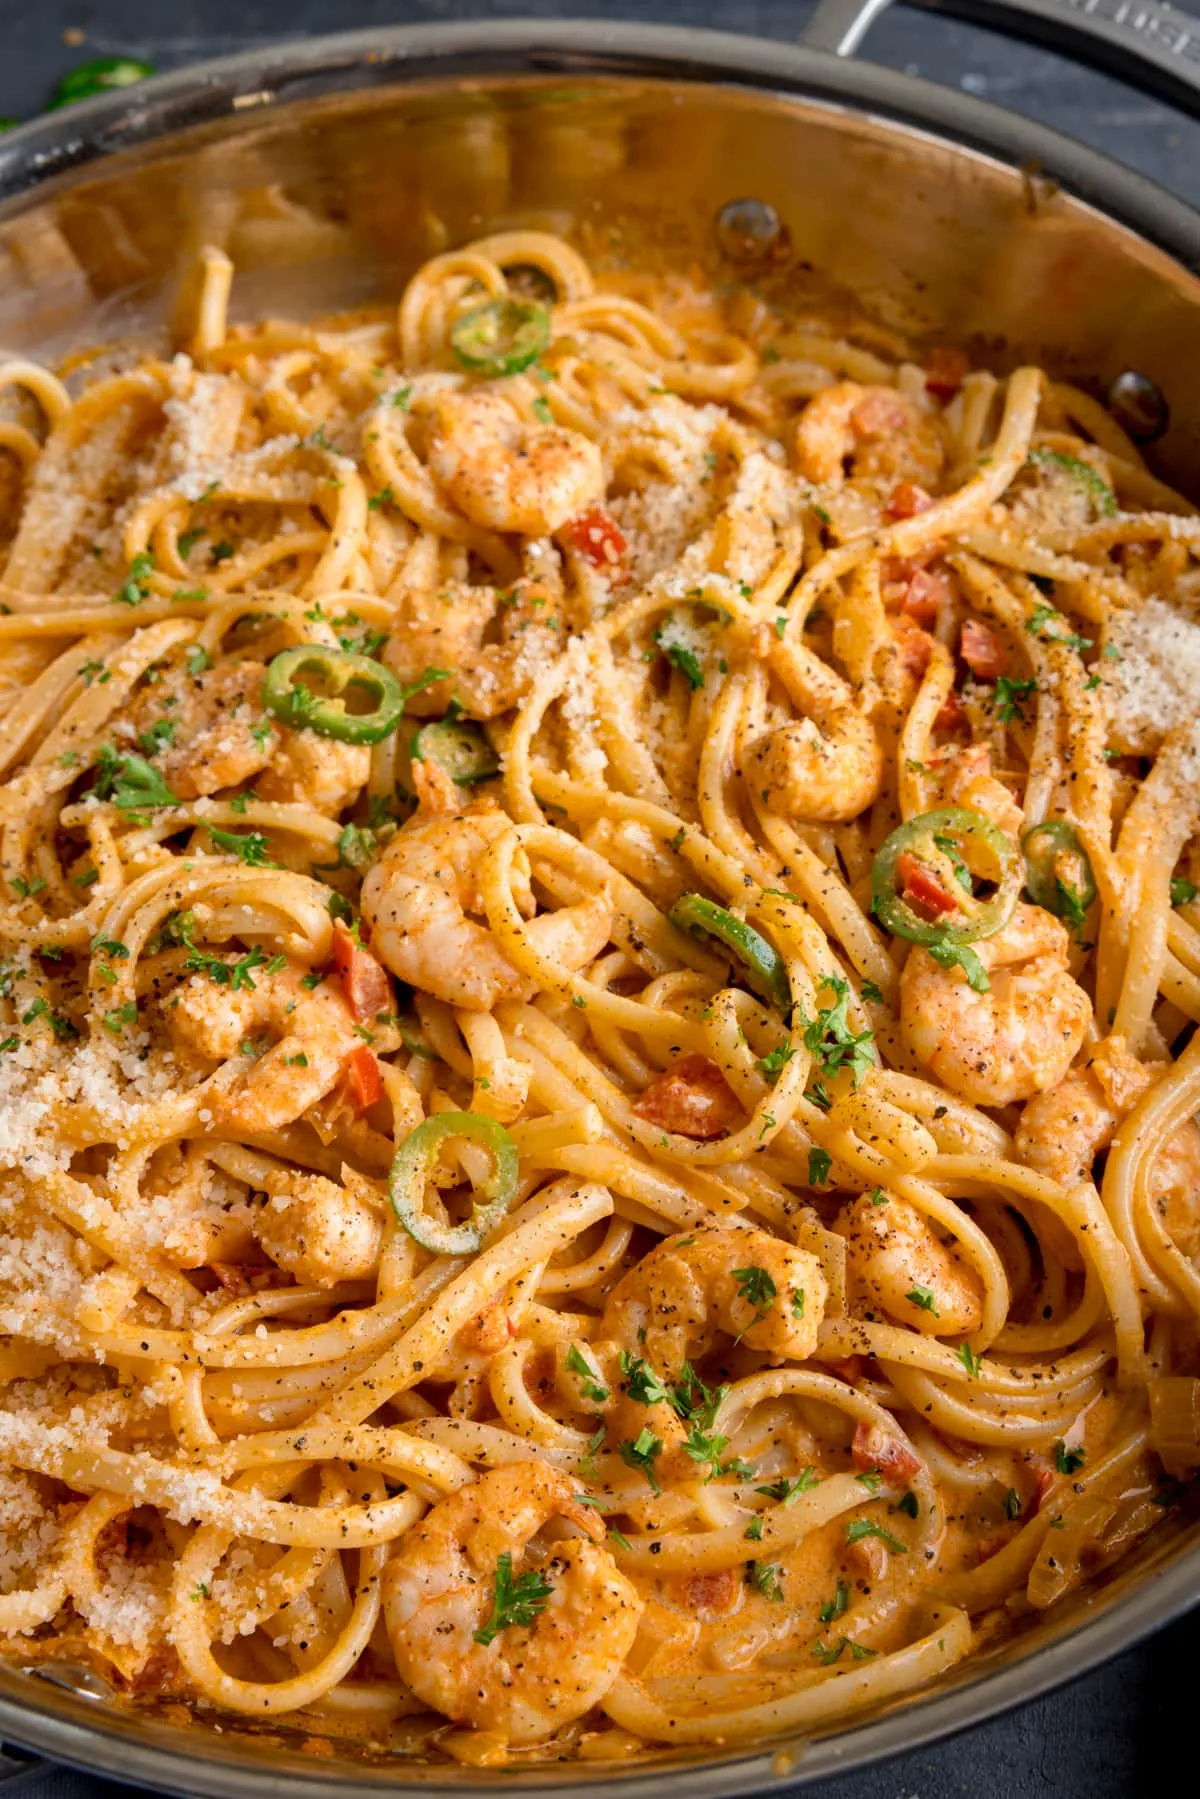 Tall close-up image of a pan of prawn linguine in a creamy buffalo sauce.